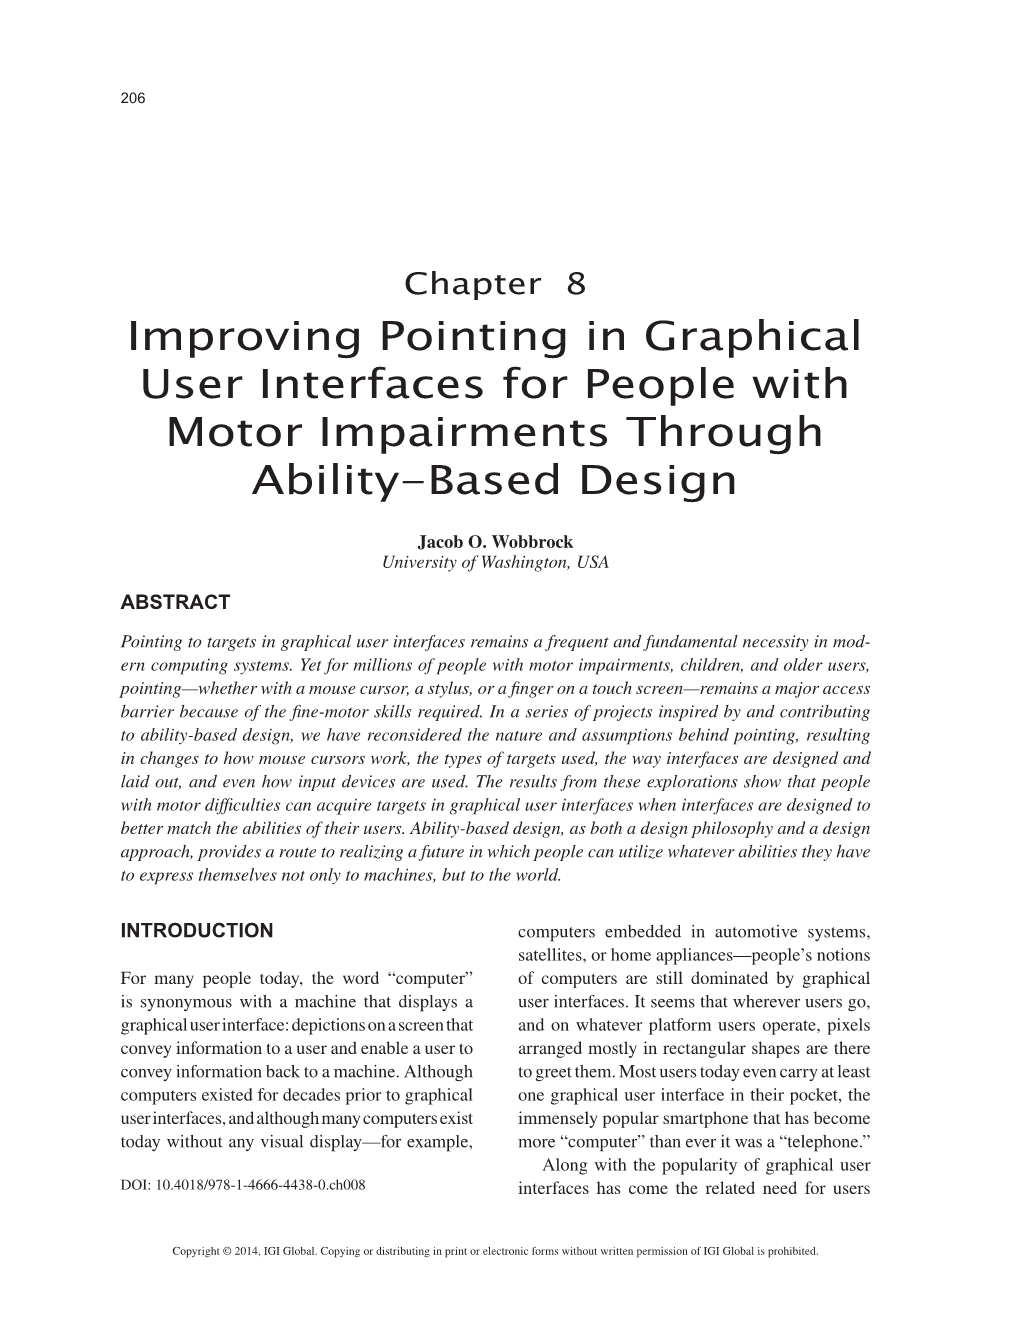 Improving Pointing in Graphical User Interfaces for People with Motor Impairments Through Ability-Based Design